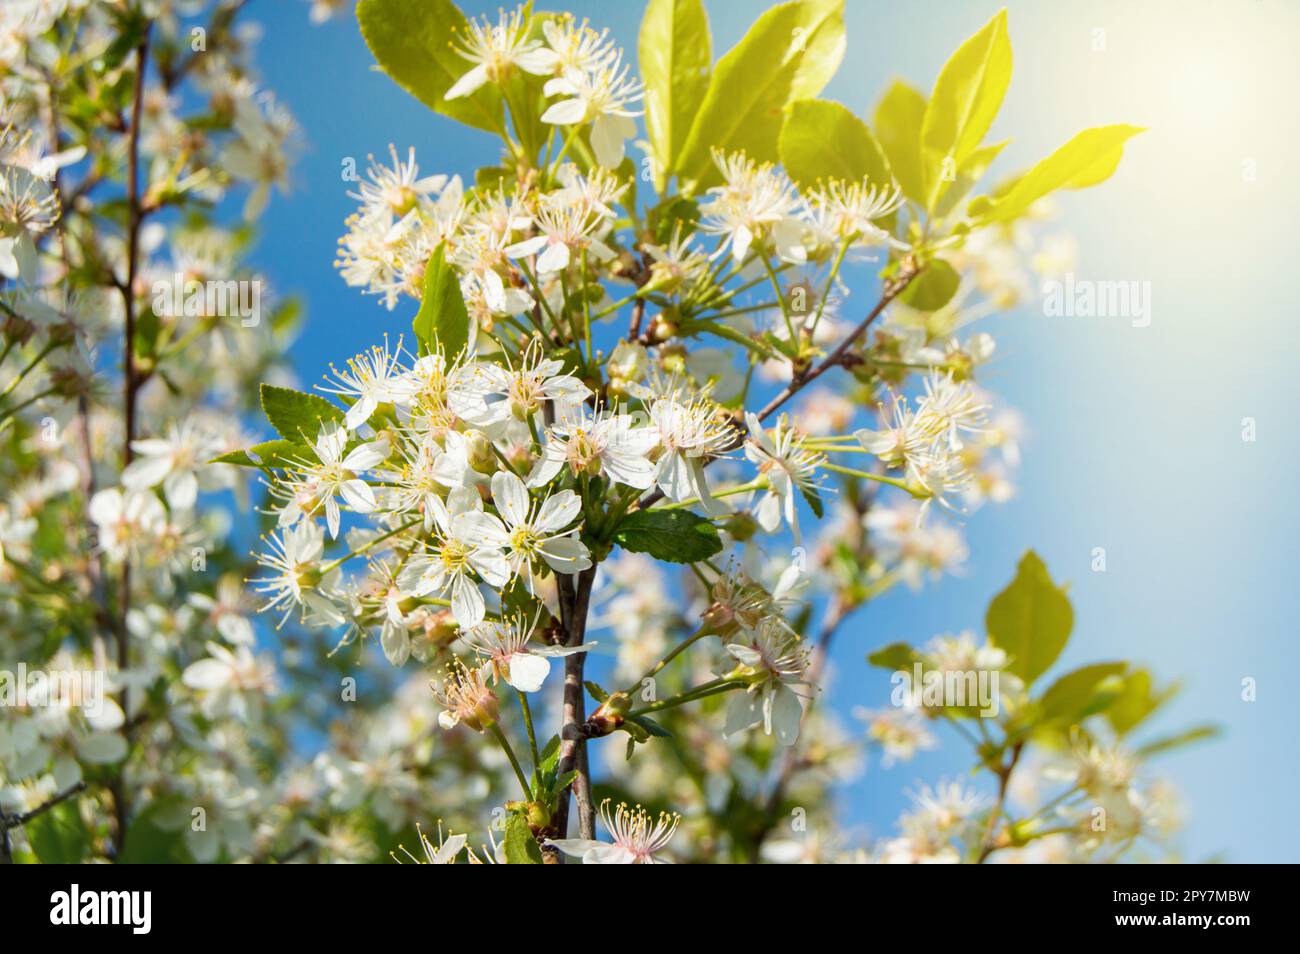 Flowering branches of Cherry on blue sky background at Sunny spring day, copy space Stock Photo